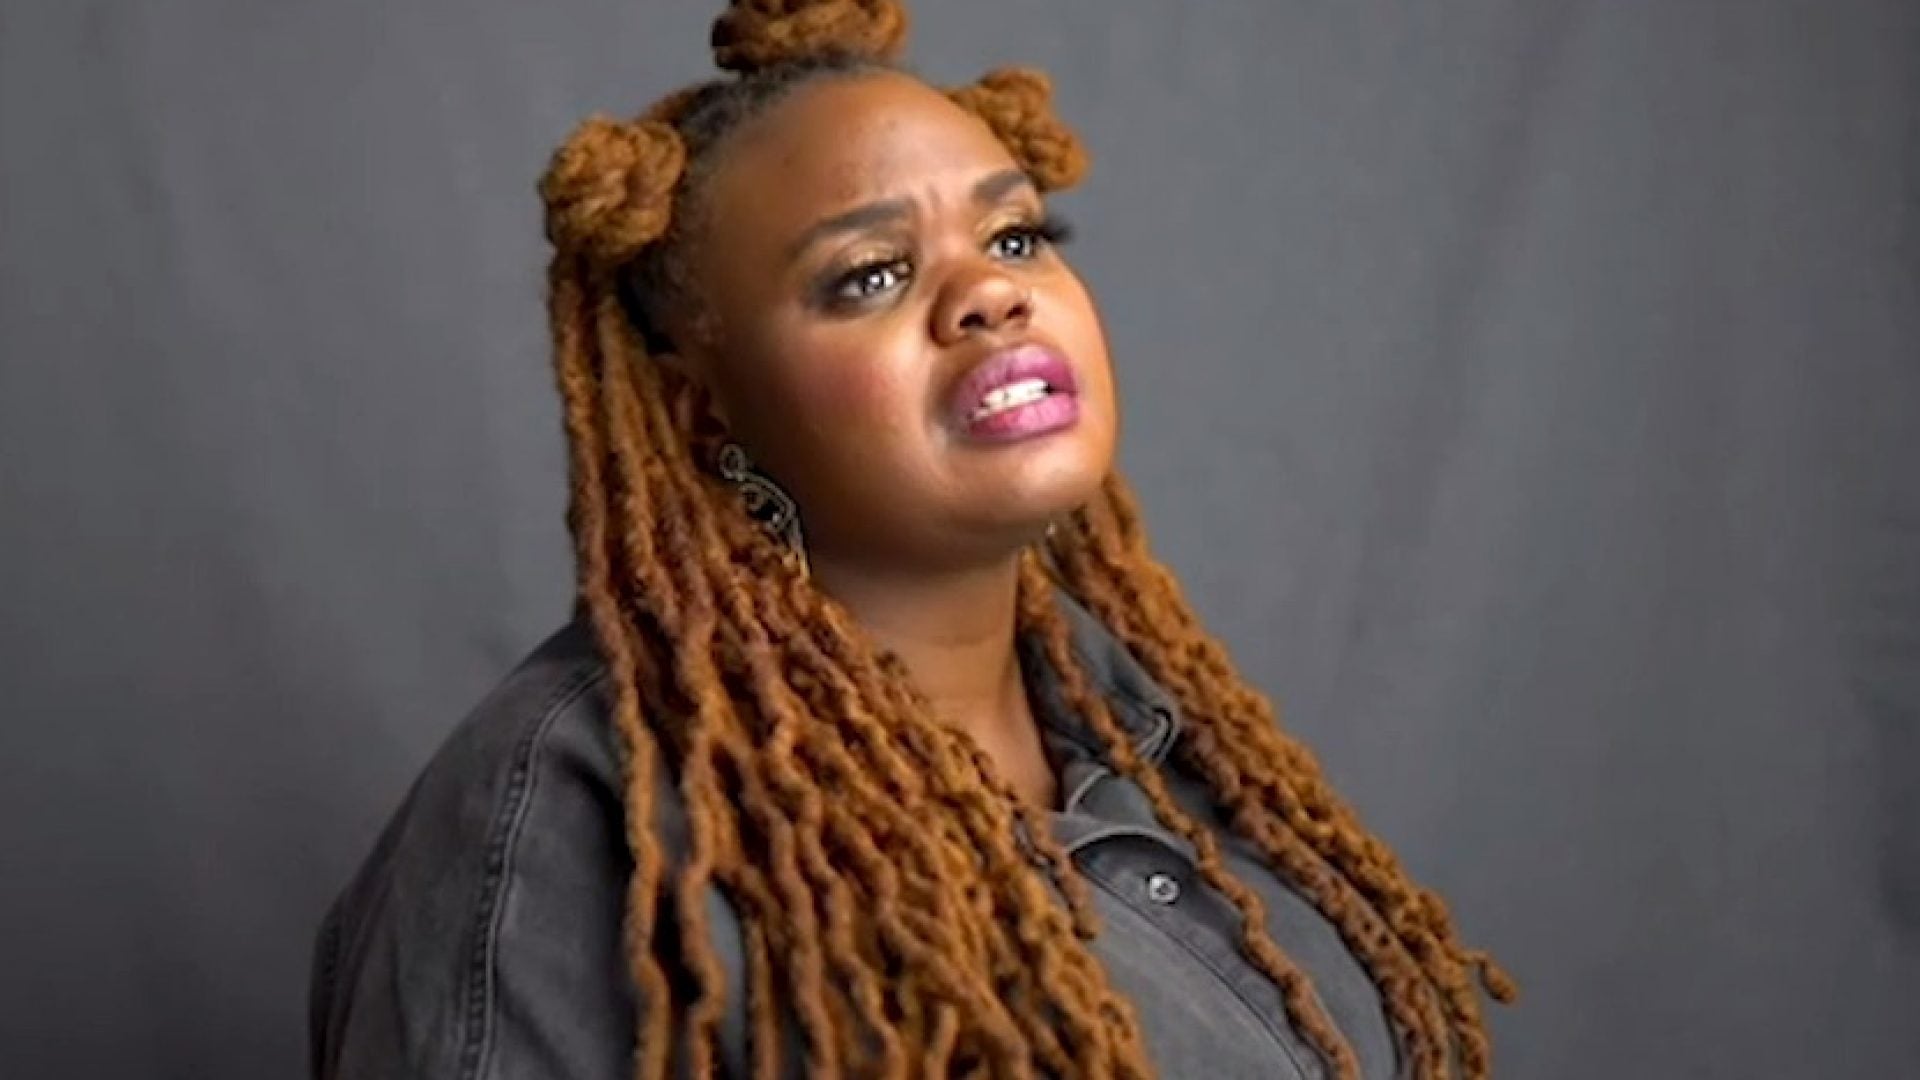 A Heaven For A Black Girl: This Powerful Spoken Word Performance Will Give You Chills